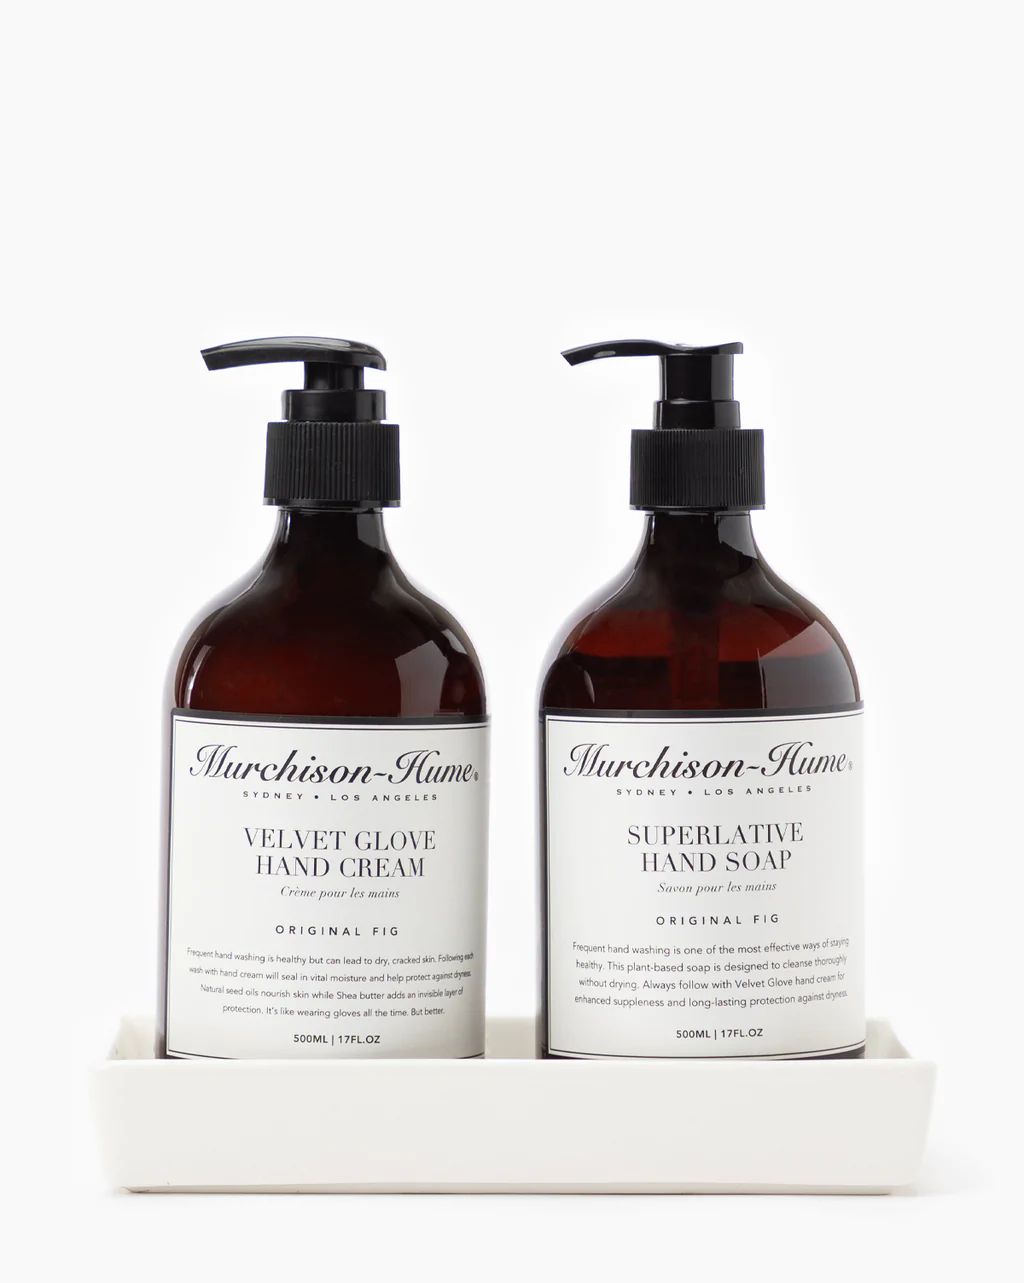 Murchison-Hume Hand Duo | McGee & Co.